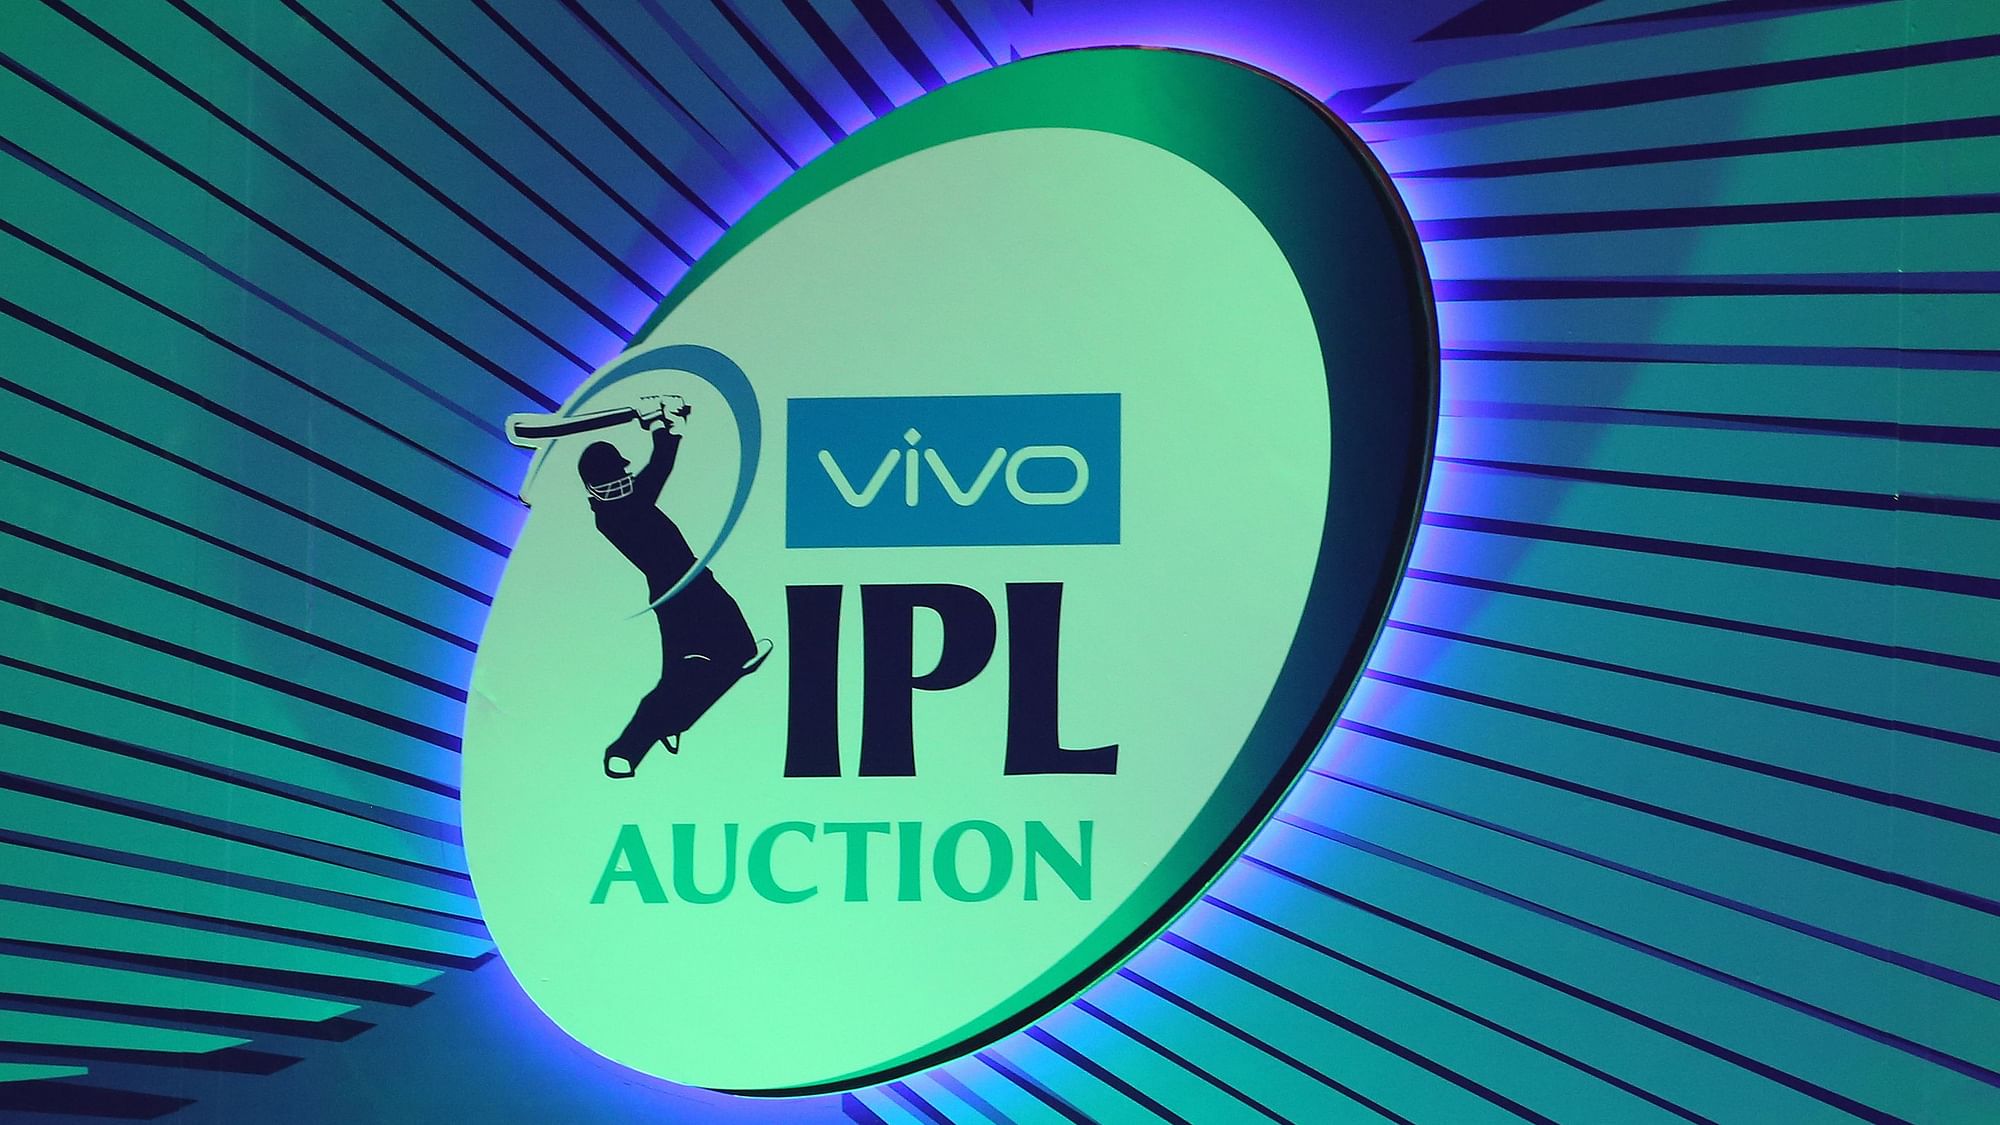 The full list of 332 players who are going under the hammer in the 2020 IPL auction on 19 December.